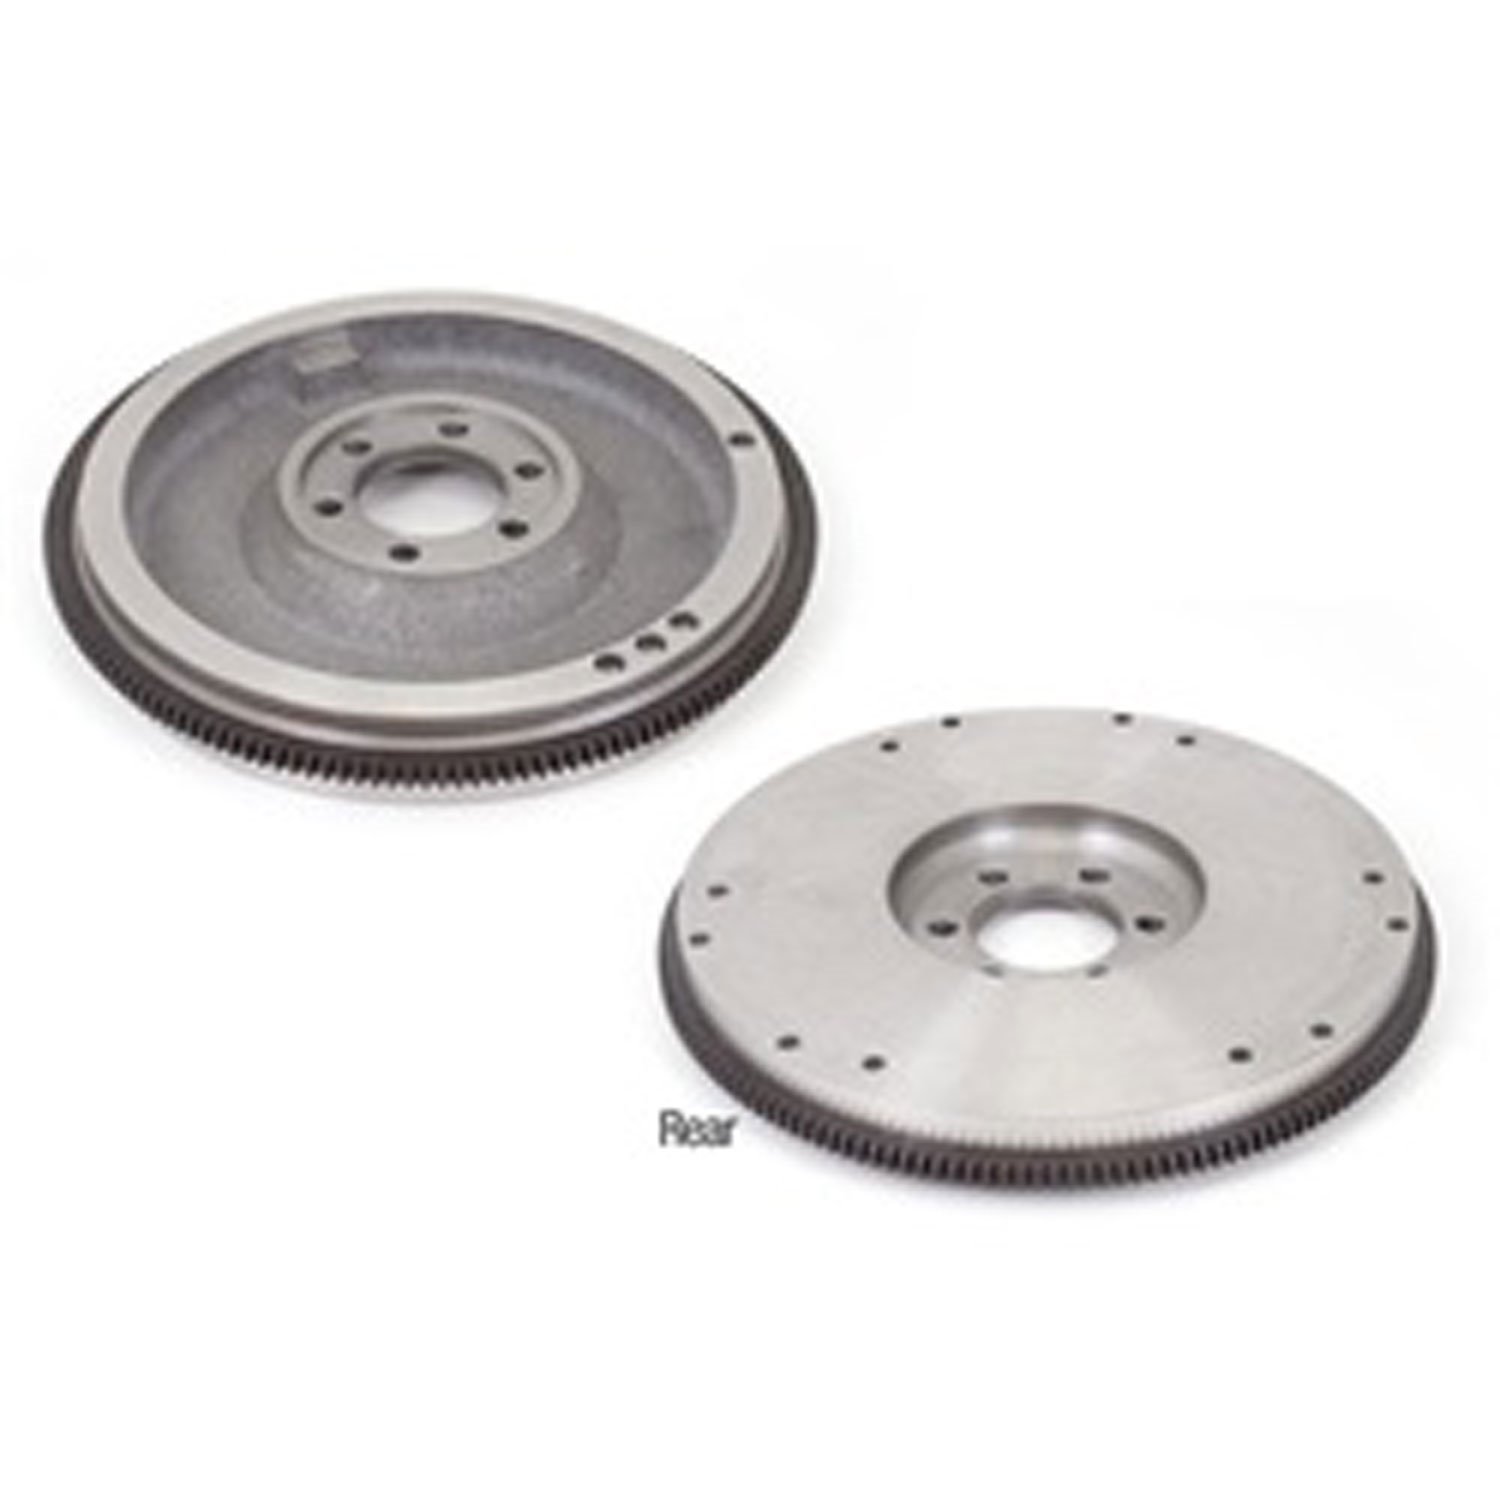 Flywheel for 1972-1991 AMC/Jeep 360 V8 with Manual Transmission, 164-Tooth [Externally Balanced]